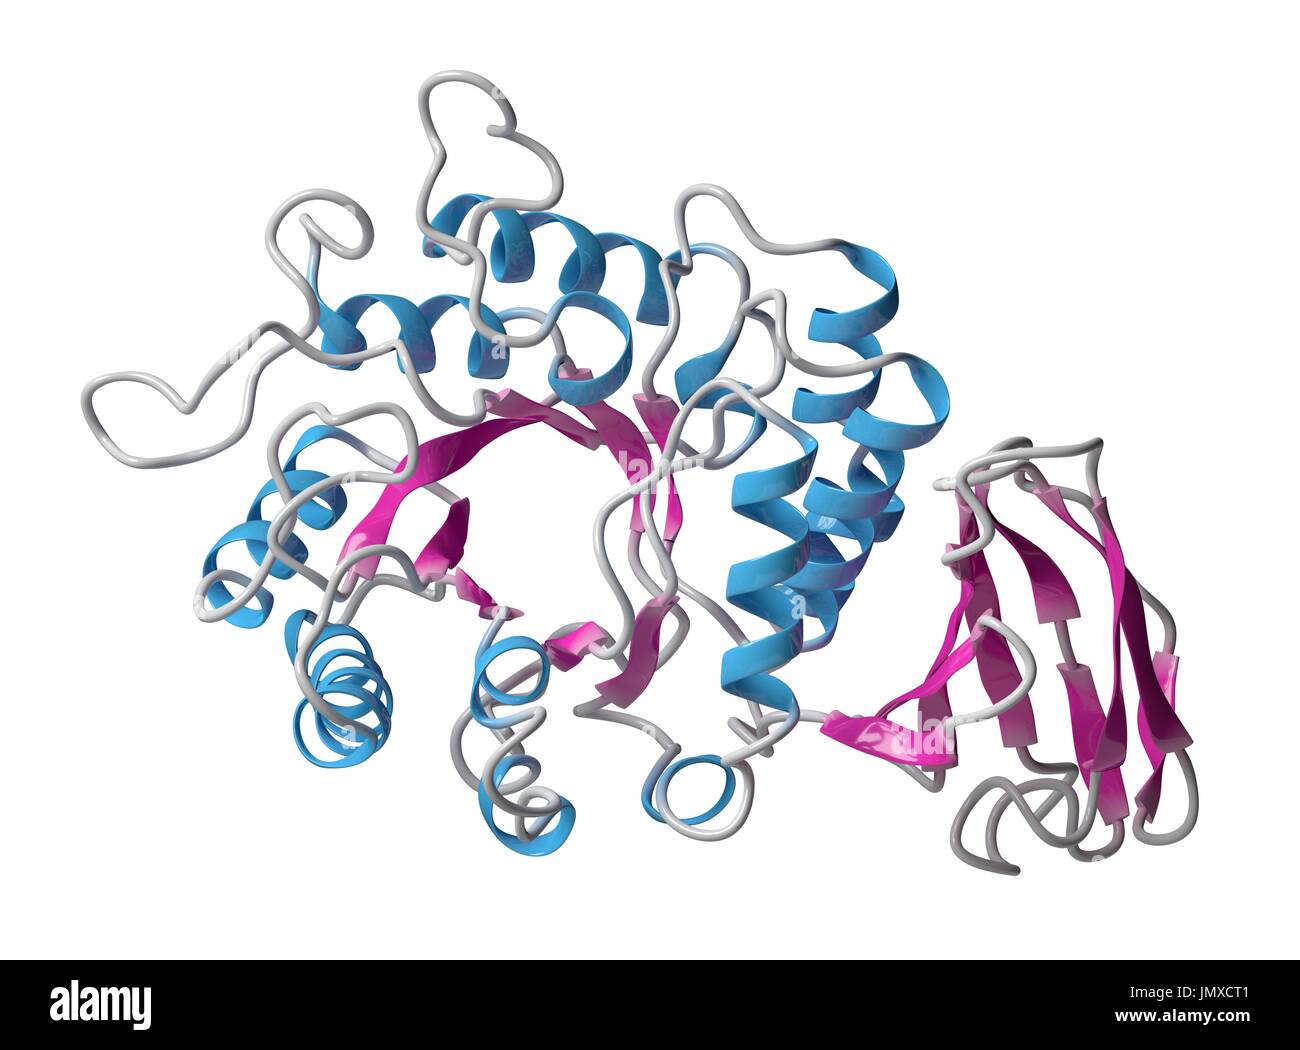 Alpha-galactosidase (Agalsidase) enzyme. Cause of Fabry's disease. Administered as enzyme replacement therapy. Cartoon model, secondary structure colouring (helices blue, sheets pink). Stock Photo